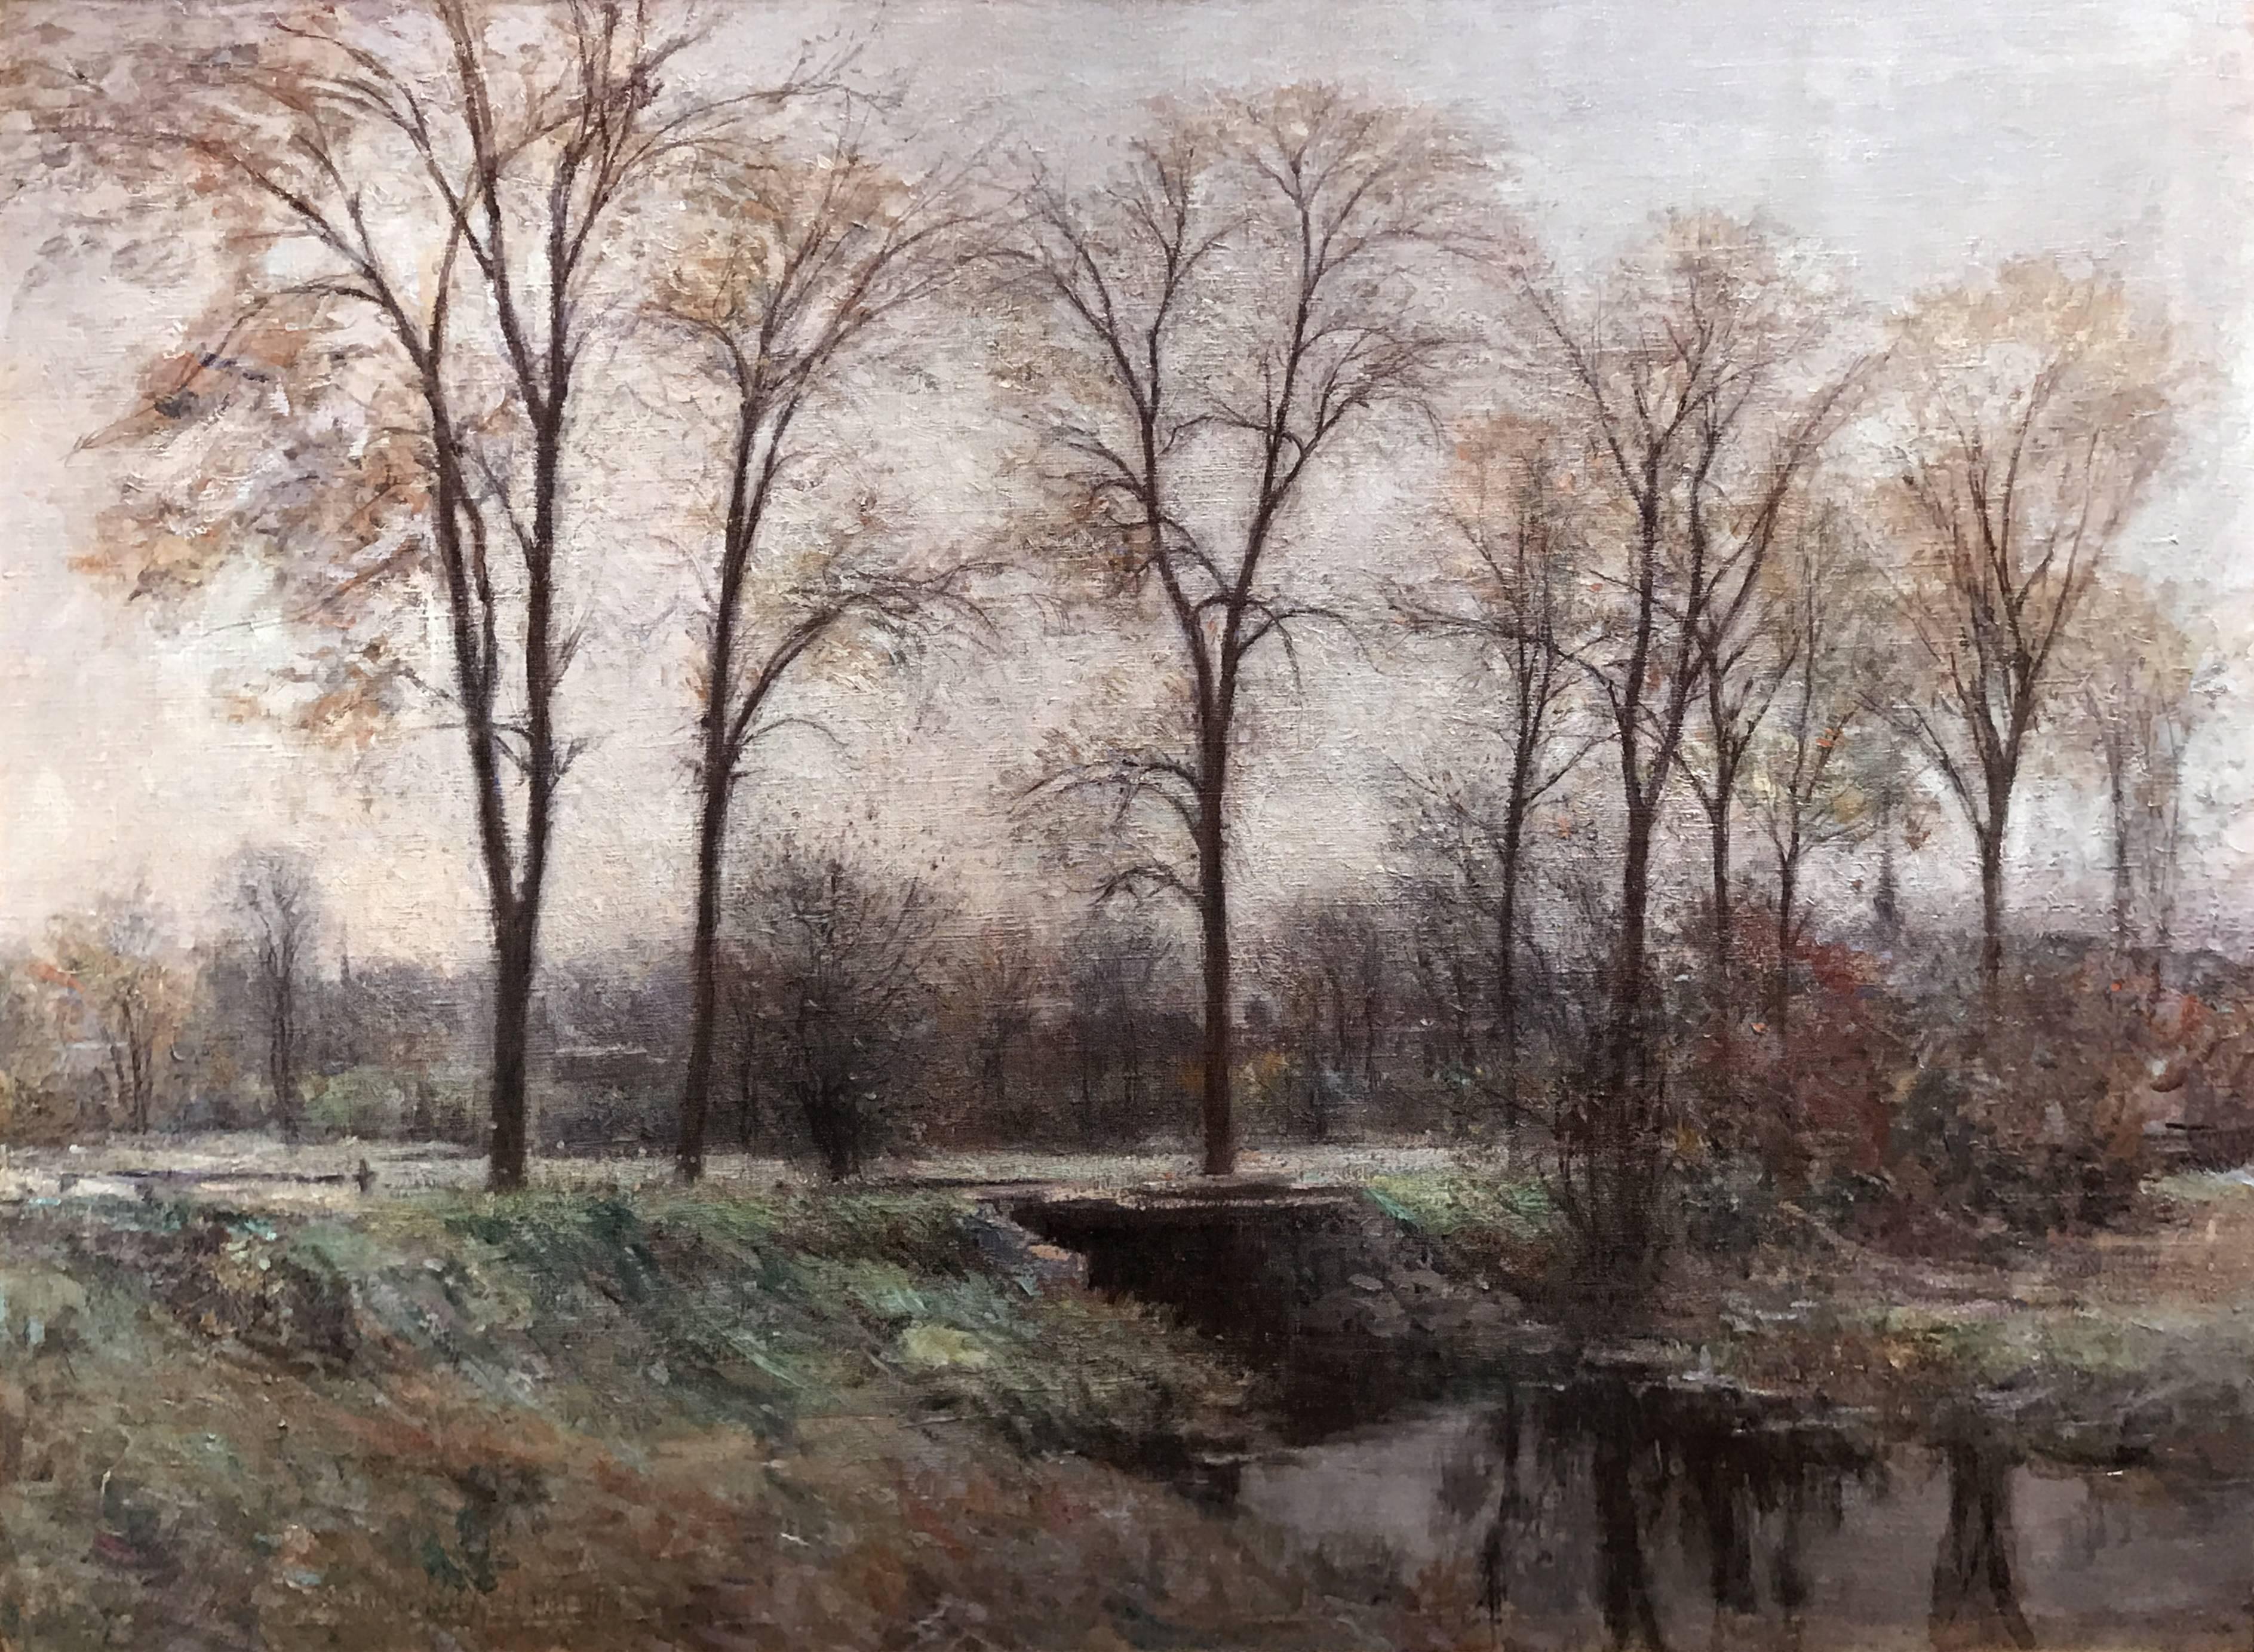 This fine landscape painting, probably The Fens, Boston, MA, was painted by American artist Edward Wilbur Dean Hamilton (1864-1943). Hamilton was born in Pennsylvania and studied painting in Boston where he became an important member of the Boston